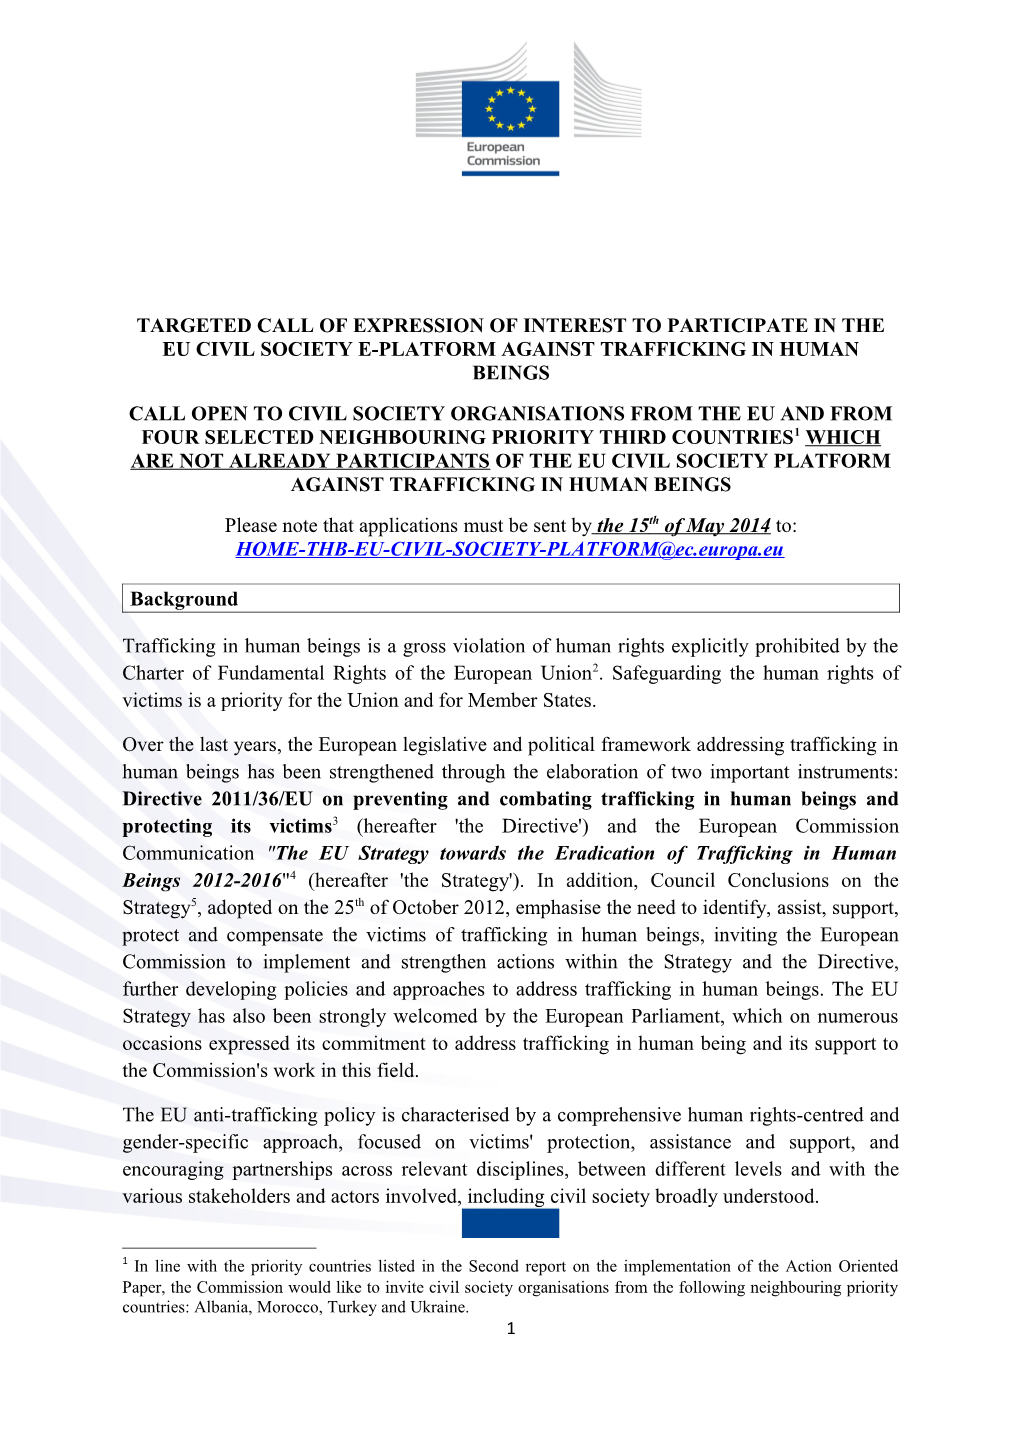 Targeted Call of Expression of Interest to Participate in the Eu Civil Society E-Platform